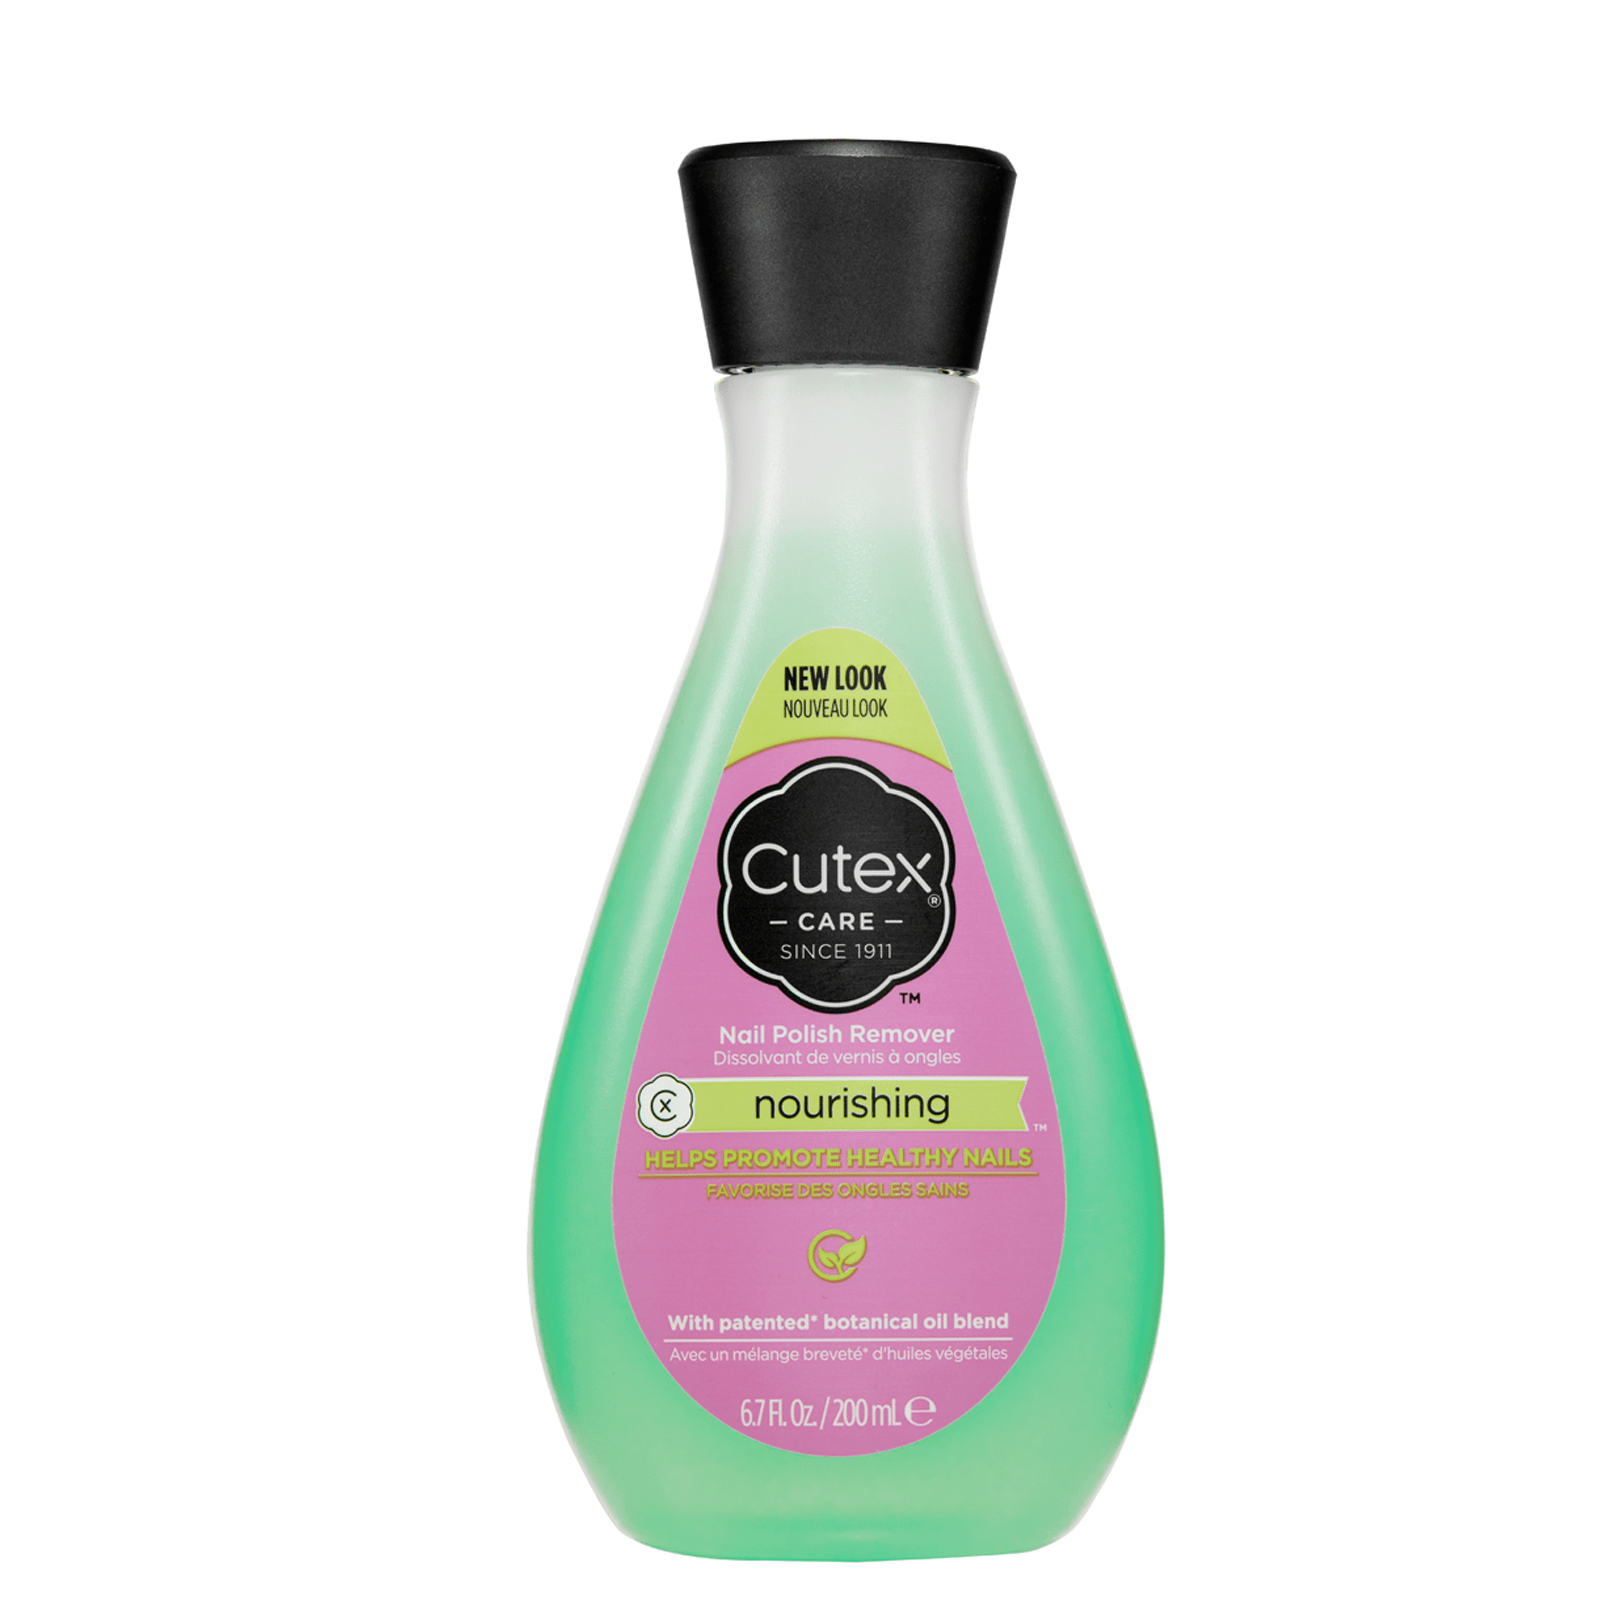 Dropship Cutex Ultra Powerful Nail Polish Remover 10.1 Fl Oz to Sell Online  at a Lower Price | Doba